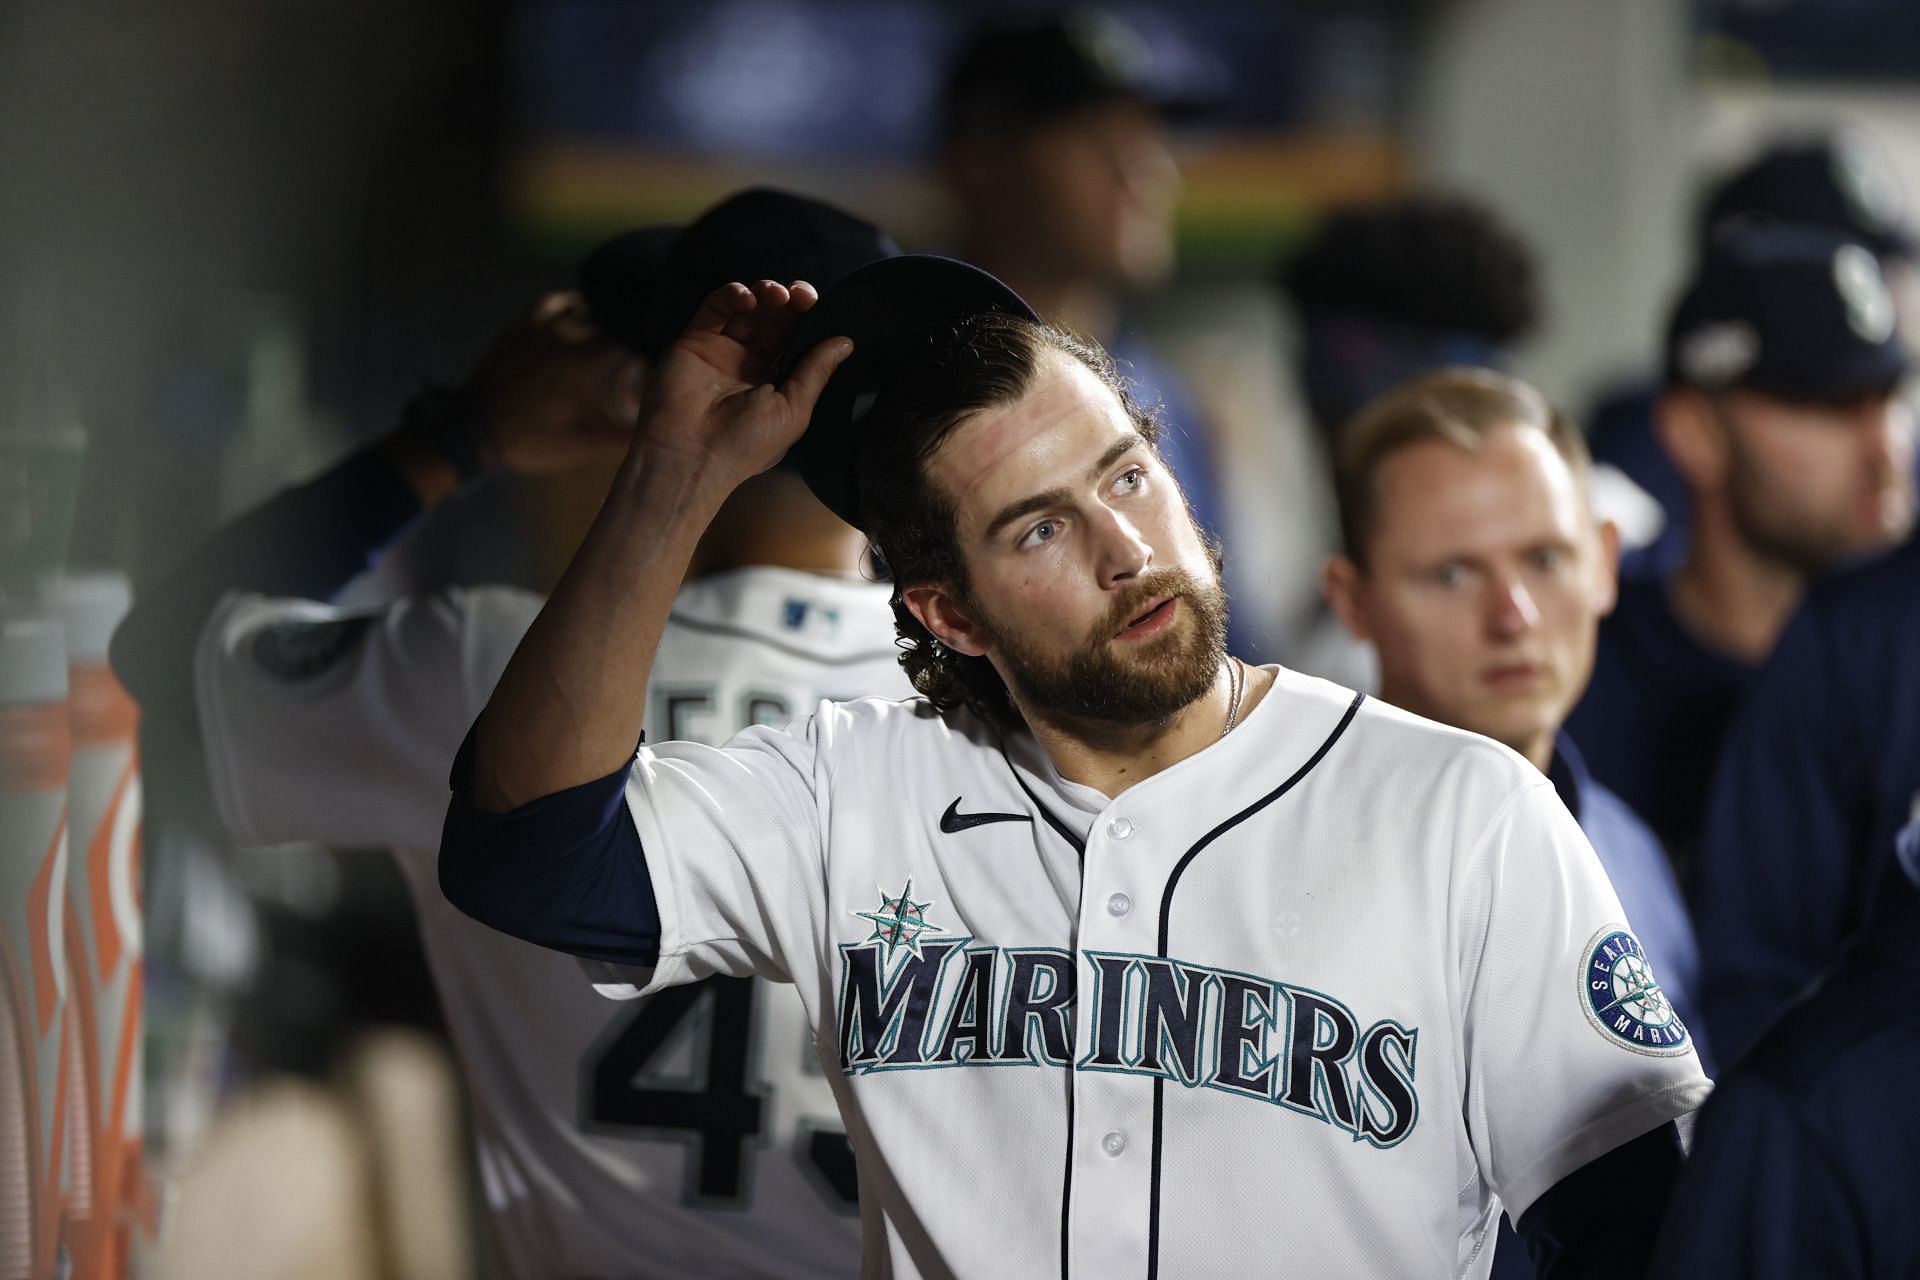 The Drought Is Over: You need these Seattle Mariners shirts